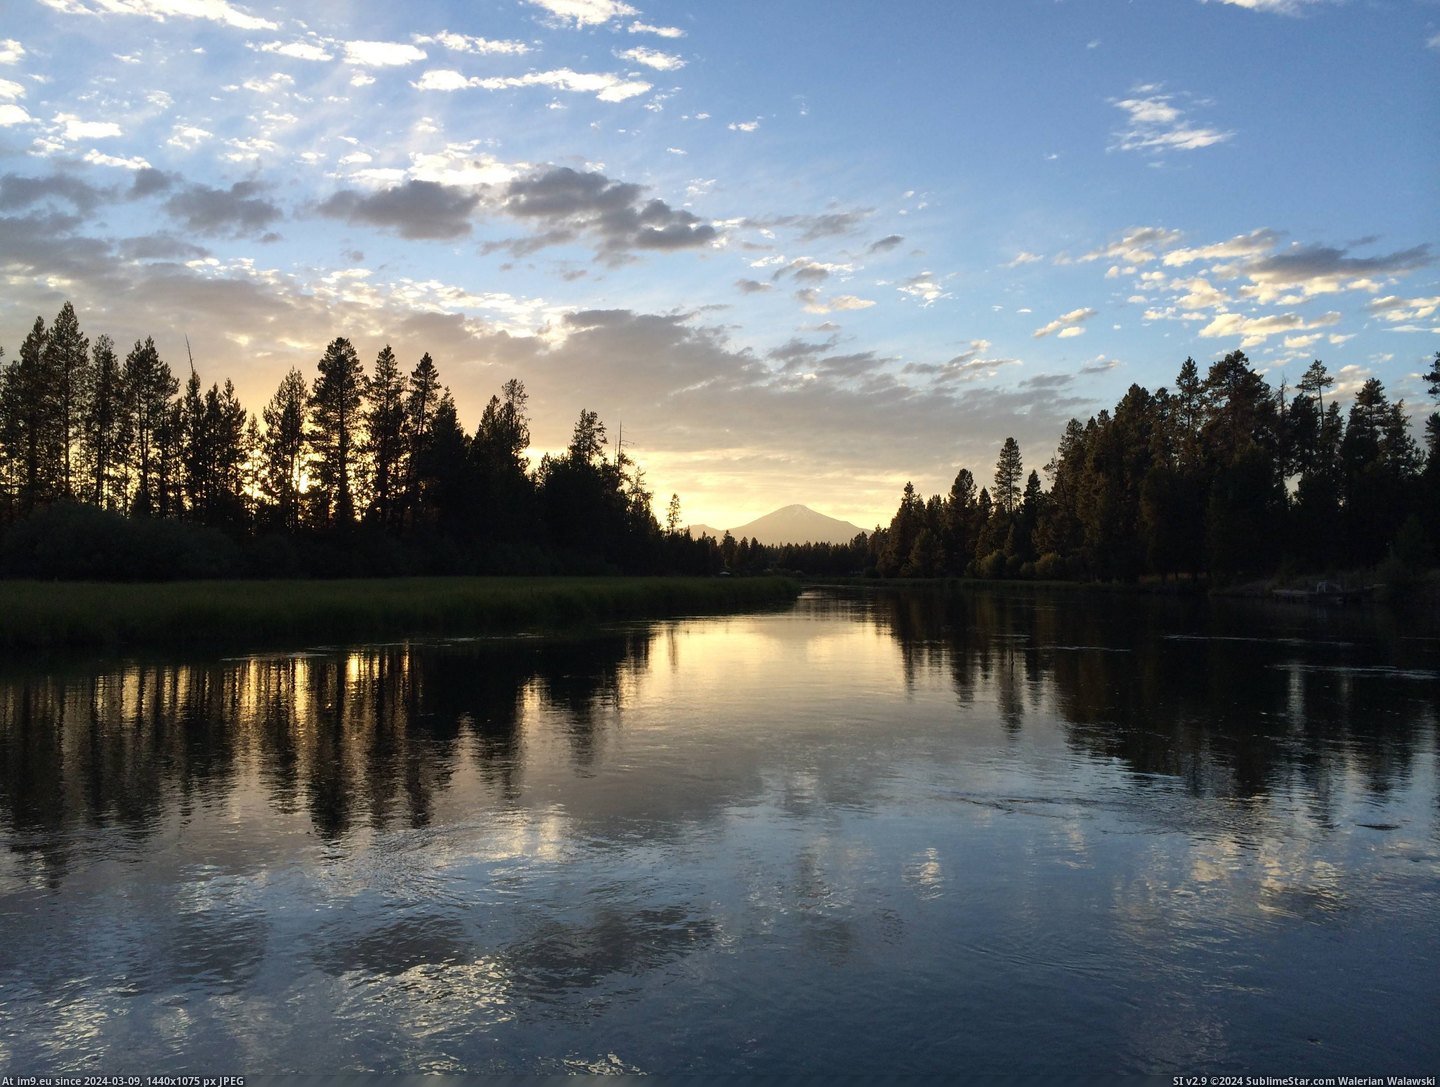 #Pretty #Turned #Fishing #Nicely #Iphone #Bachelor [Earthporn] Went fishing and all I had to take pictures was my iPhone.. Still turned out pretty nicely! View of Mt Bachelor from Pic. (Bild von album My r/EARTHPORN favs))